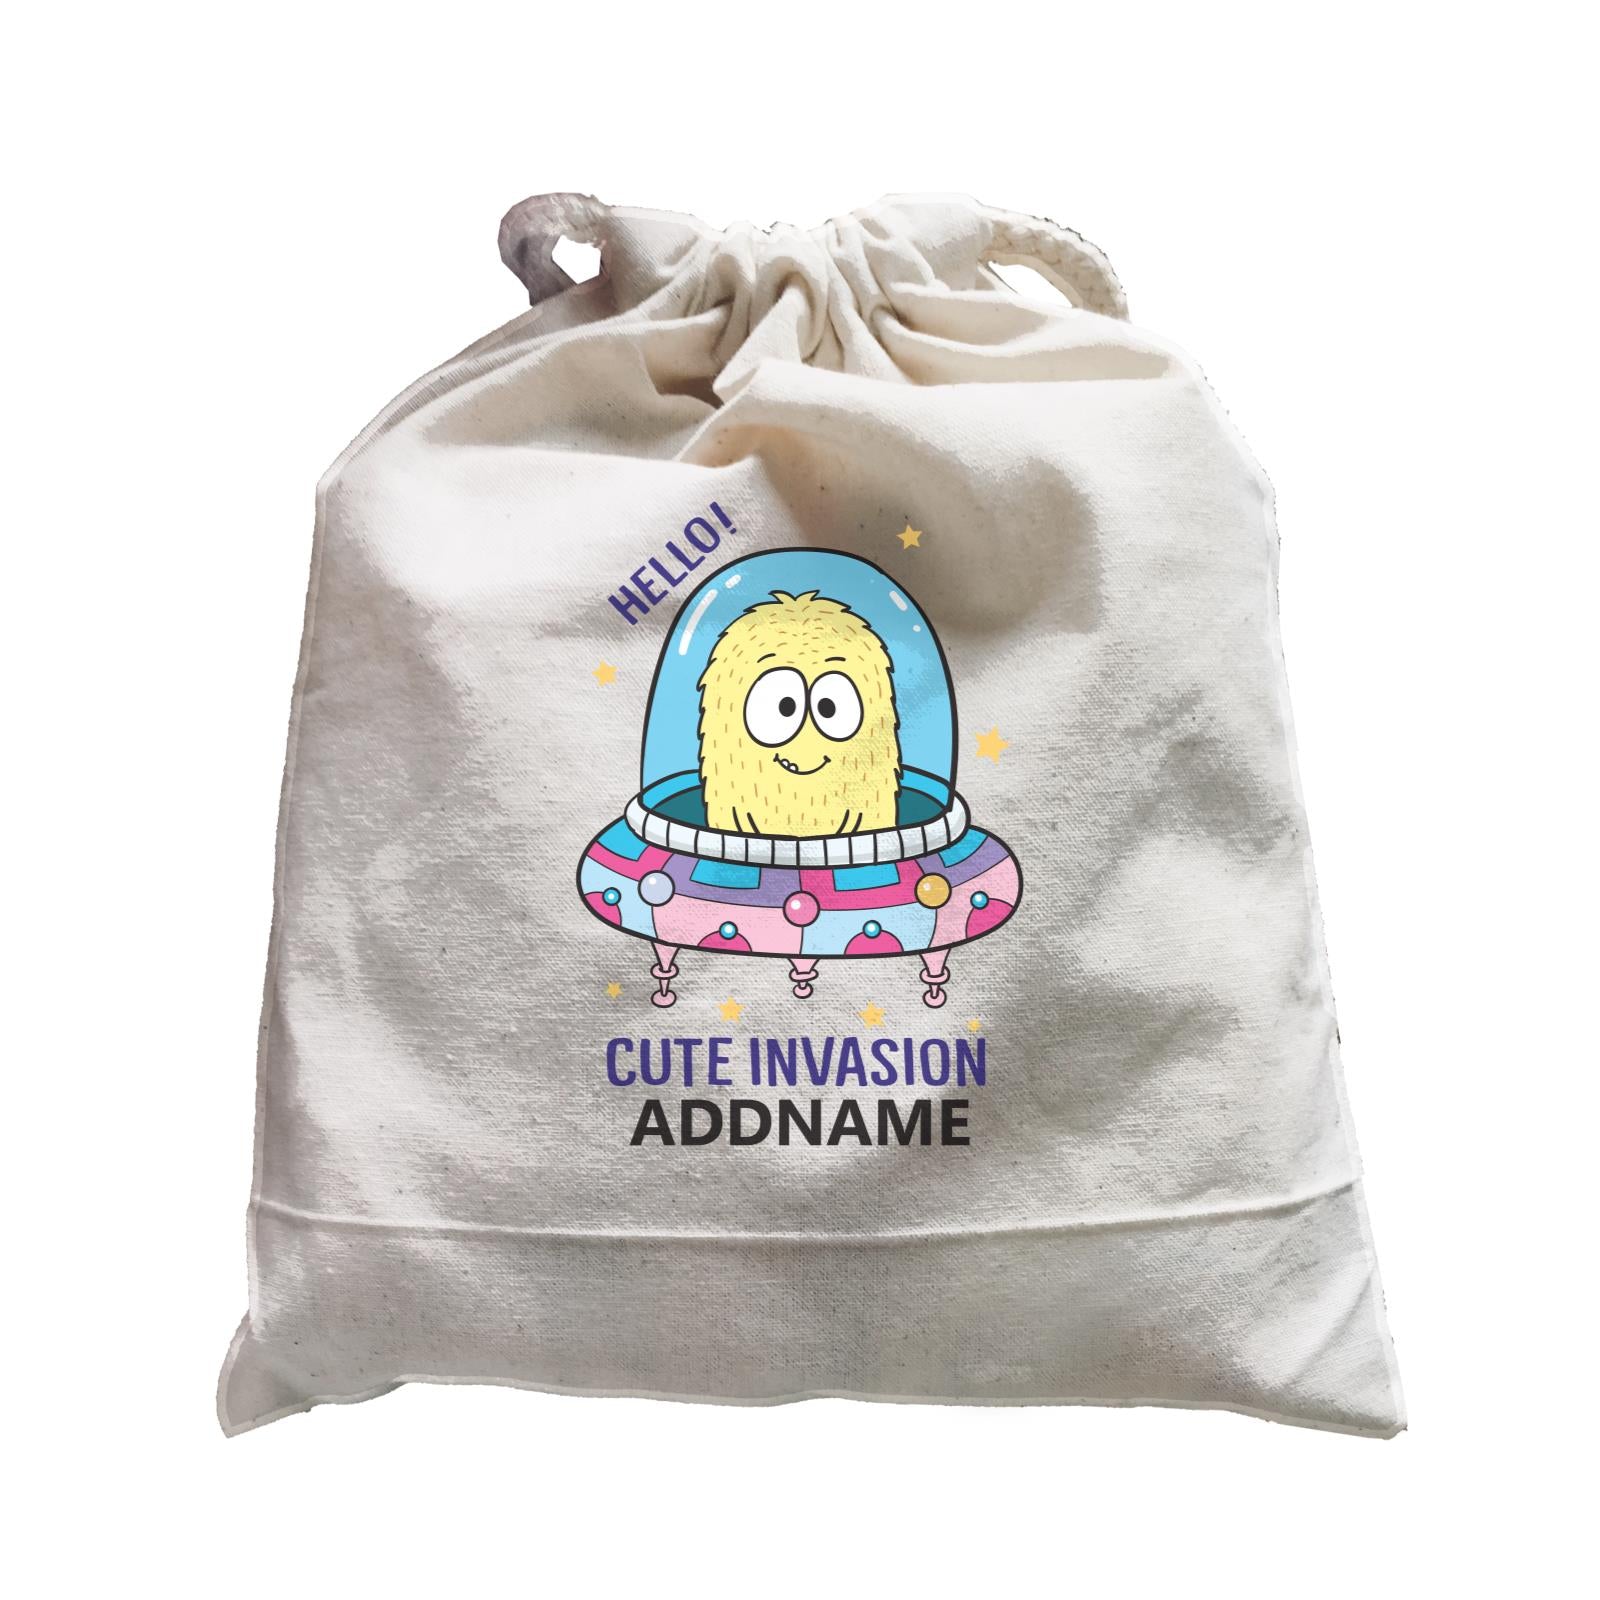 Cool Cute Monster Hello Cute Invasion Monster Addname Satchel